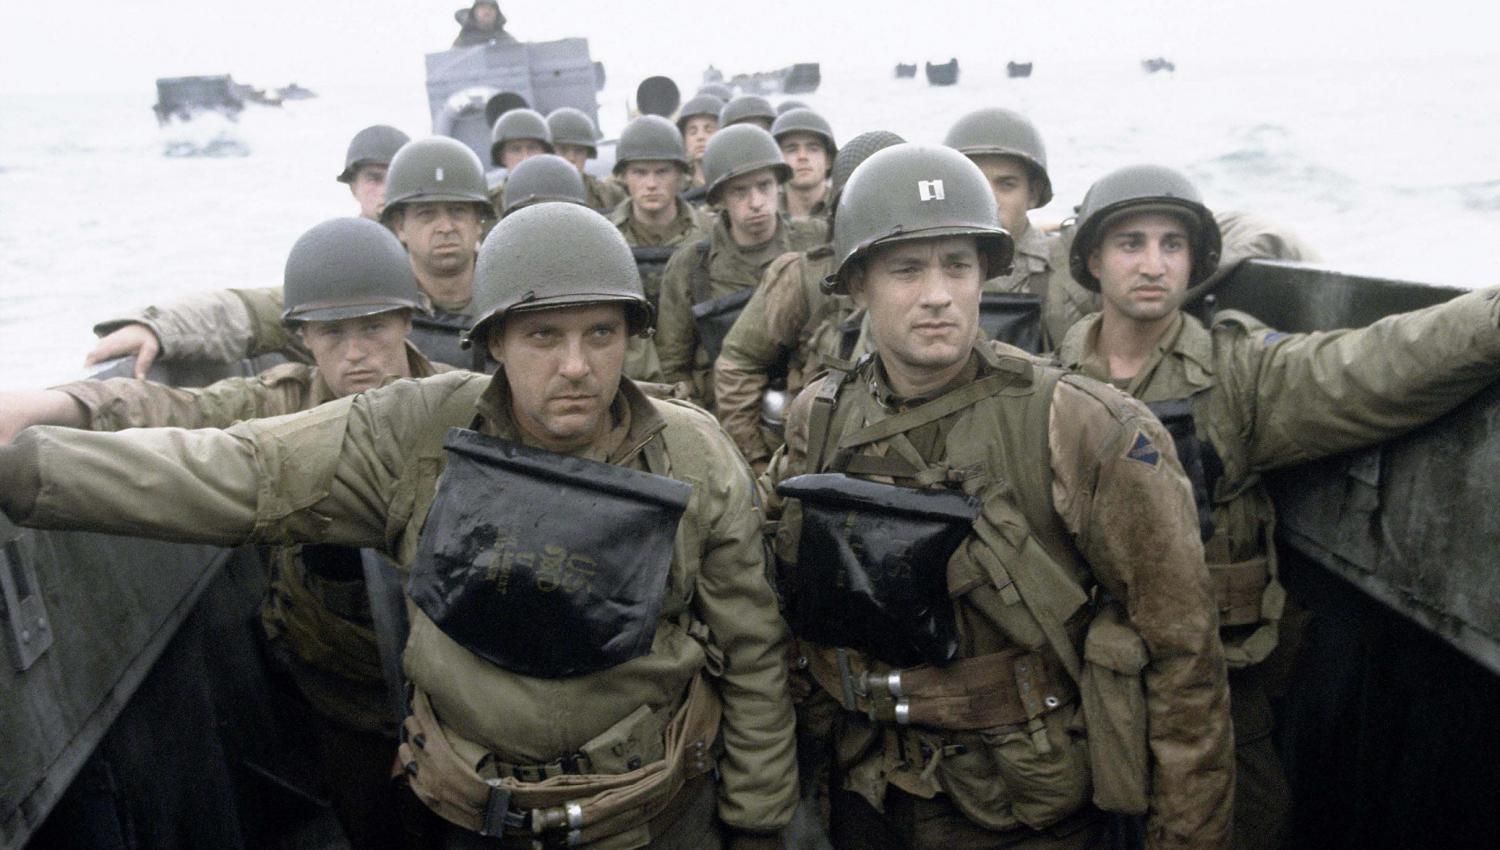 American Soldiers in one of the scenes of Saving Private Ryan